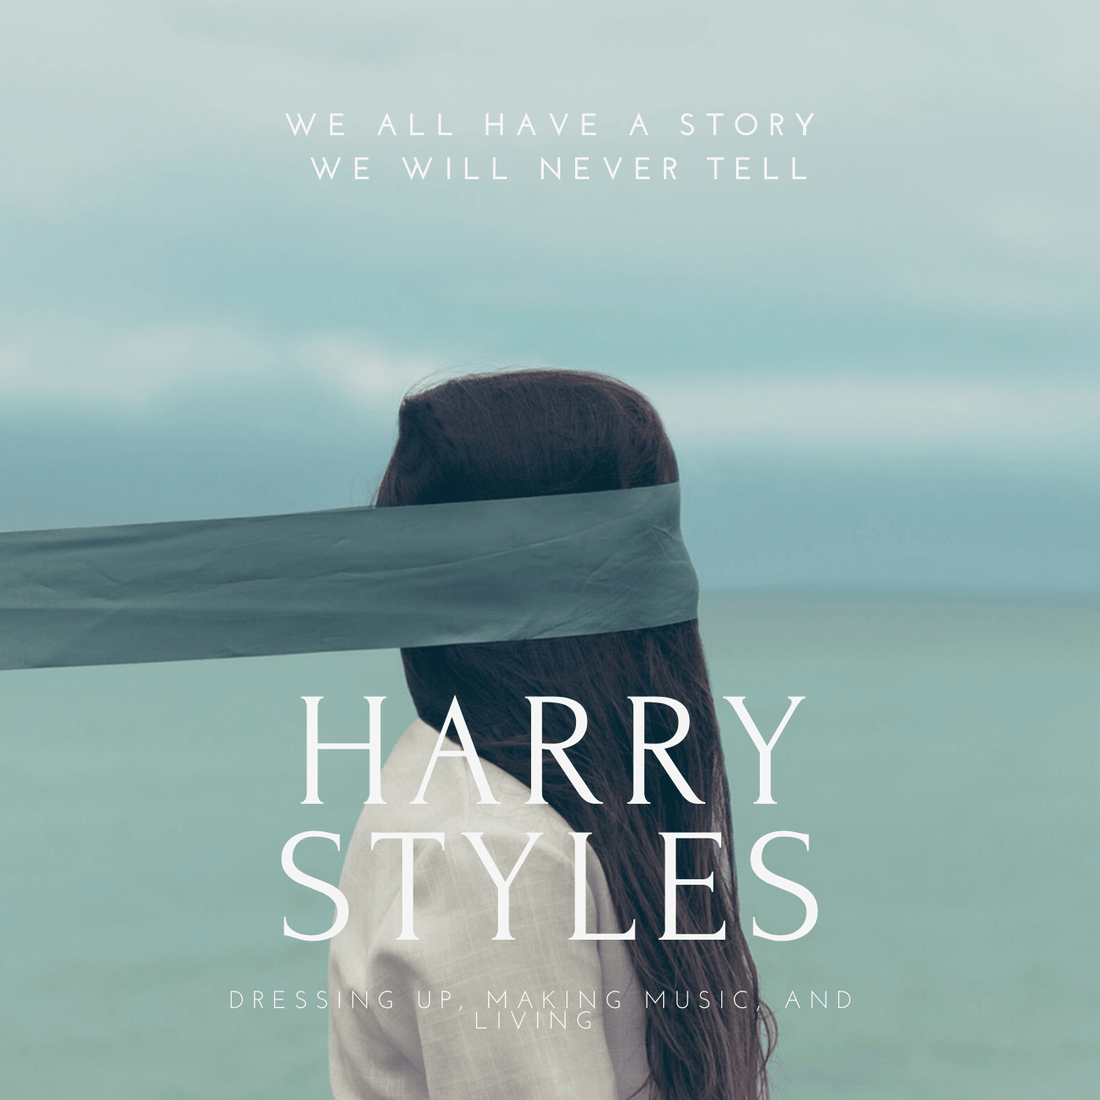 Harry Styles on Dressing Up, Making Music, and Living - 98types - 98types